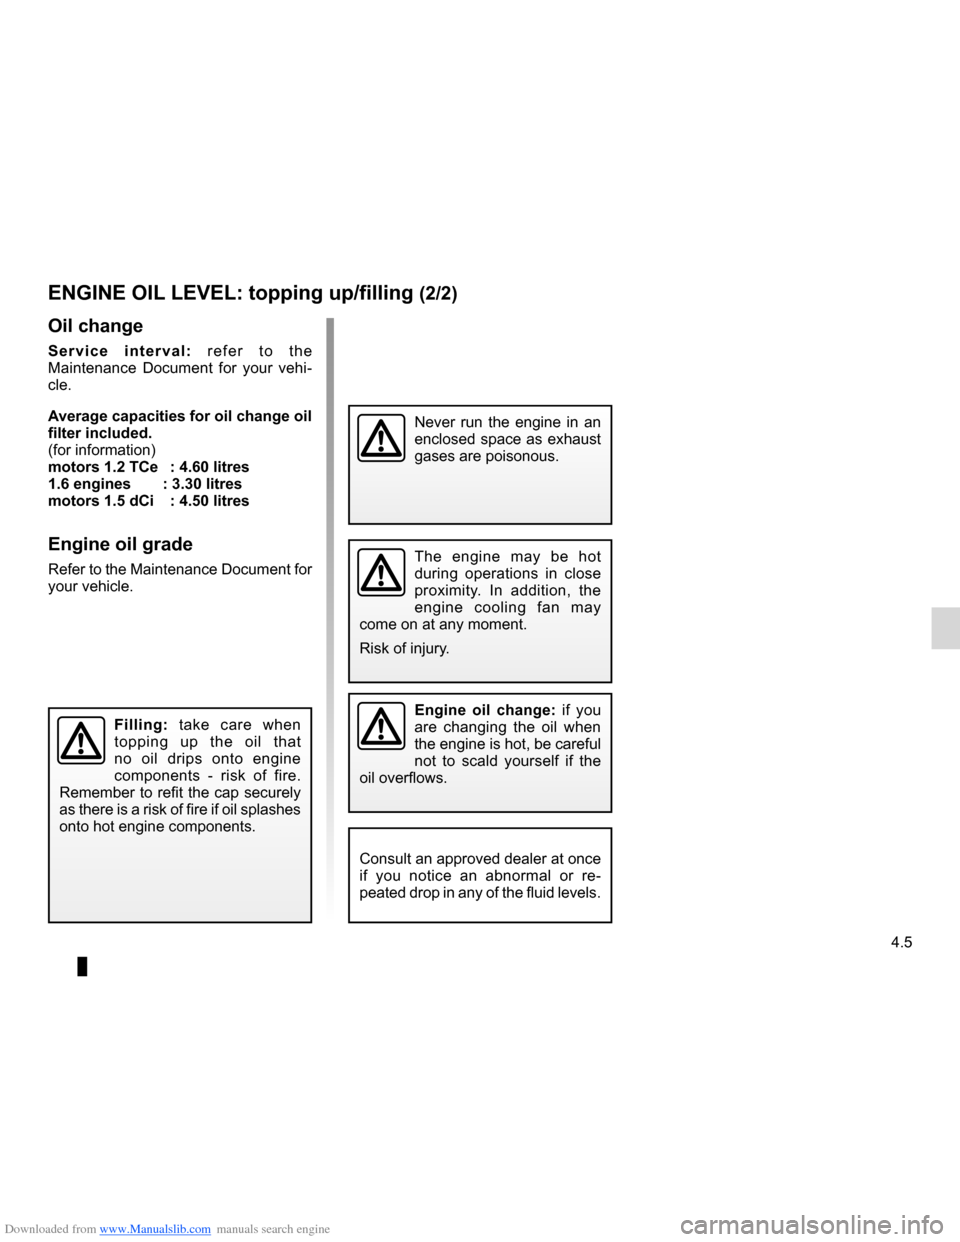 DACIA LODGY 2012 1.G Owners Manual Downloaded from www.Manualslib.com manuals search engine oil change .............................................................. (current page)
JauneNoirNoir texte
4.5
ENG_UD26633_2
Niveau huile mot